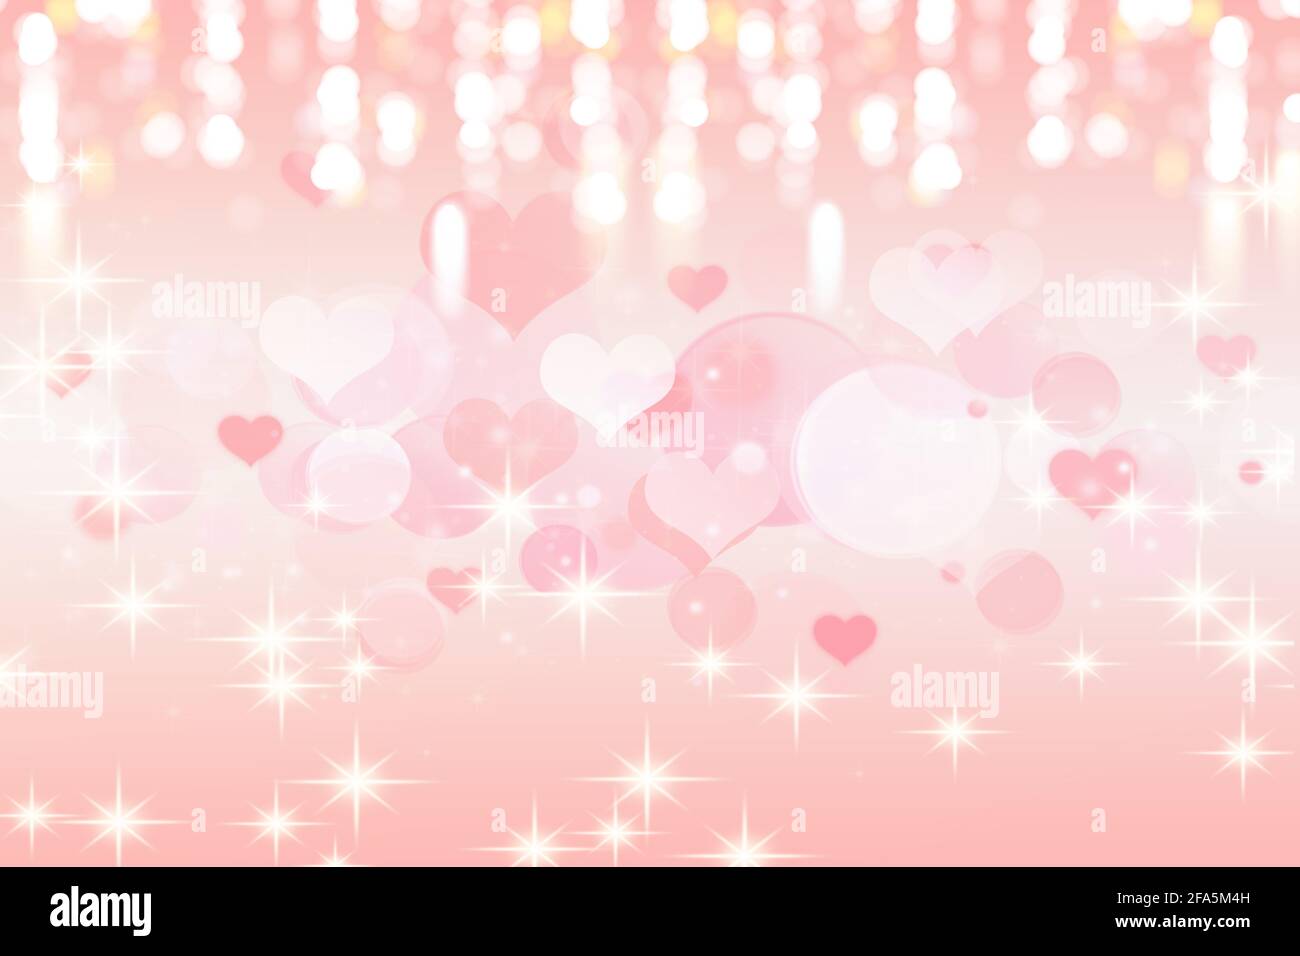 Abstract pink heart background with sparkles and light spots. Illustration  Stock Photo - Alamy